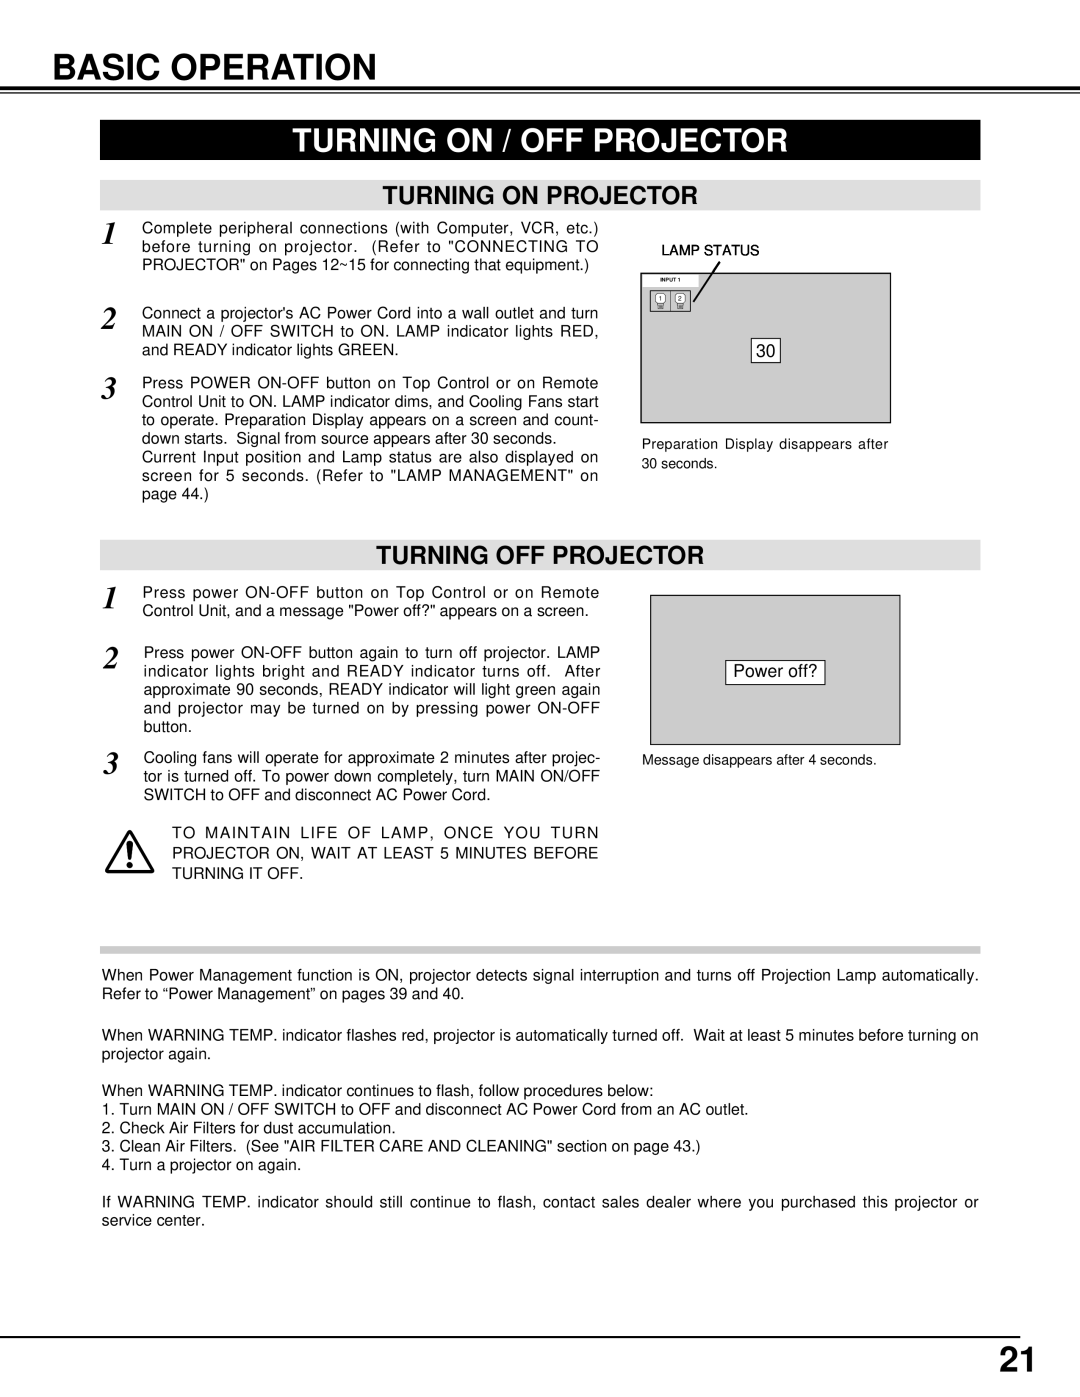 Christie Digital Systems 38-VIV301-01 user manual Basic Operation, Turning On / Off Projector, Turning On Projector 